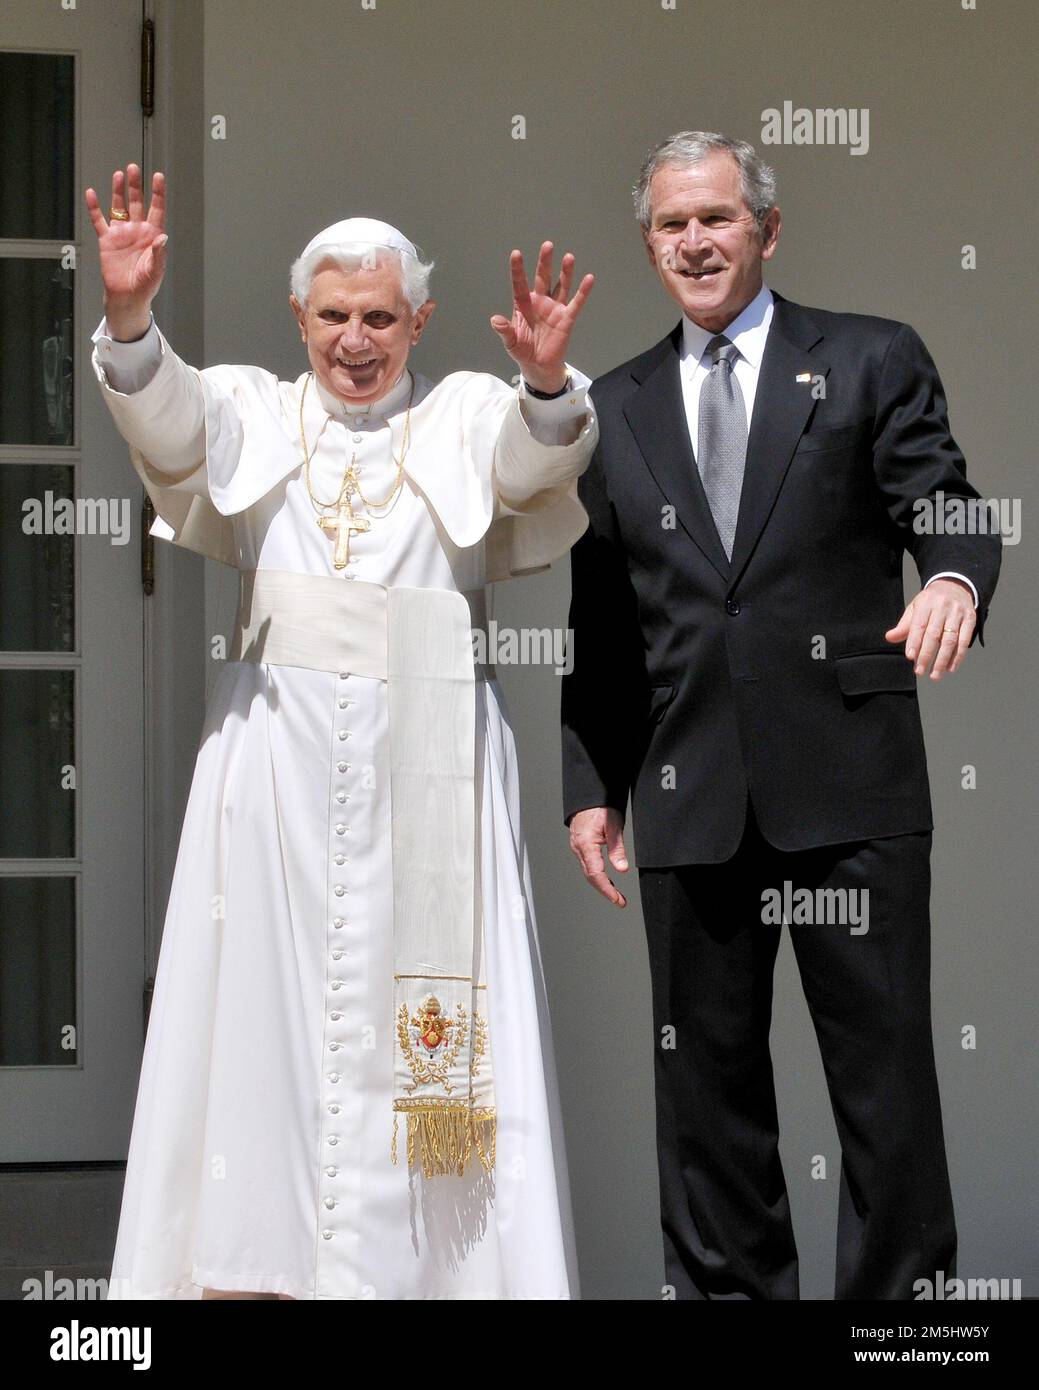 Washington, United States Of America. 16th Apr, 2008. Pope Benedict XVI raises his hands as United States President George W. Bush stop to pose for photographers as they walk along the Colonnade at the White House in Washington, DC on Wednesday, April 16, 2008. Credit: Ron Sachs/CNP/Sipa USA.(RESTRICTION: NO New York or New Jersey Newspapers or newspapers within a 75 mile radius of New York City) Credit: Sipa USA/Alamy Live News Stock Photo